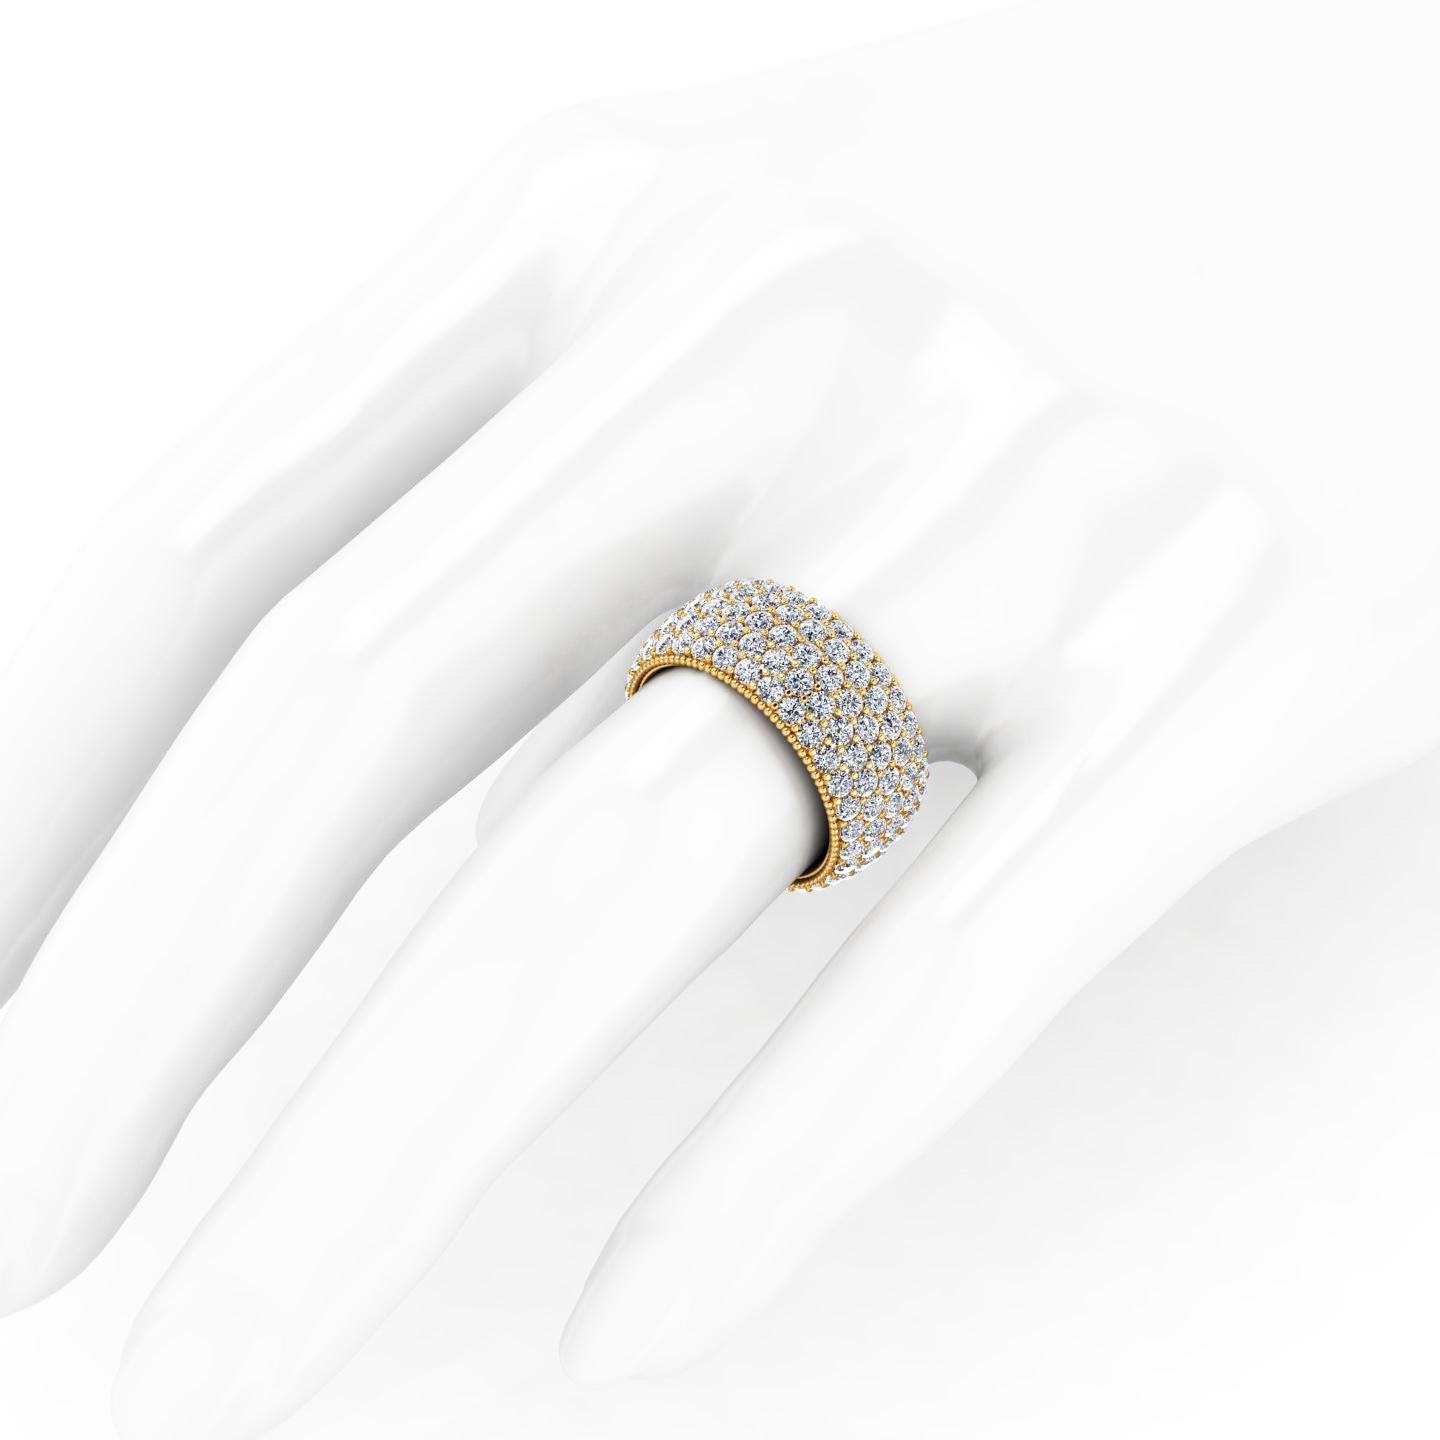 4.70 Carat Wide White Diamond Pave Ring in 18 Karat Yellow Gold In New Condition For Sale In New York, NY